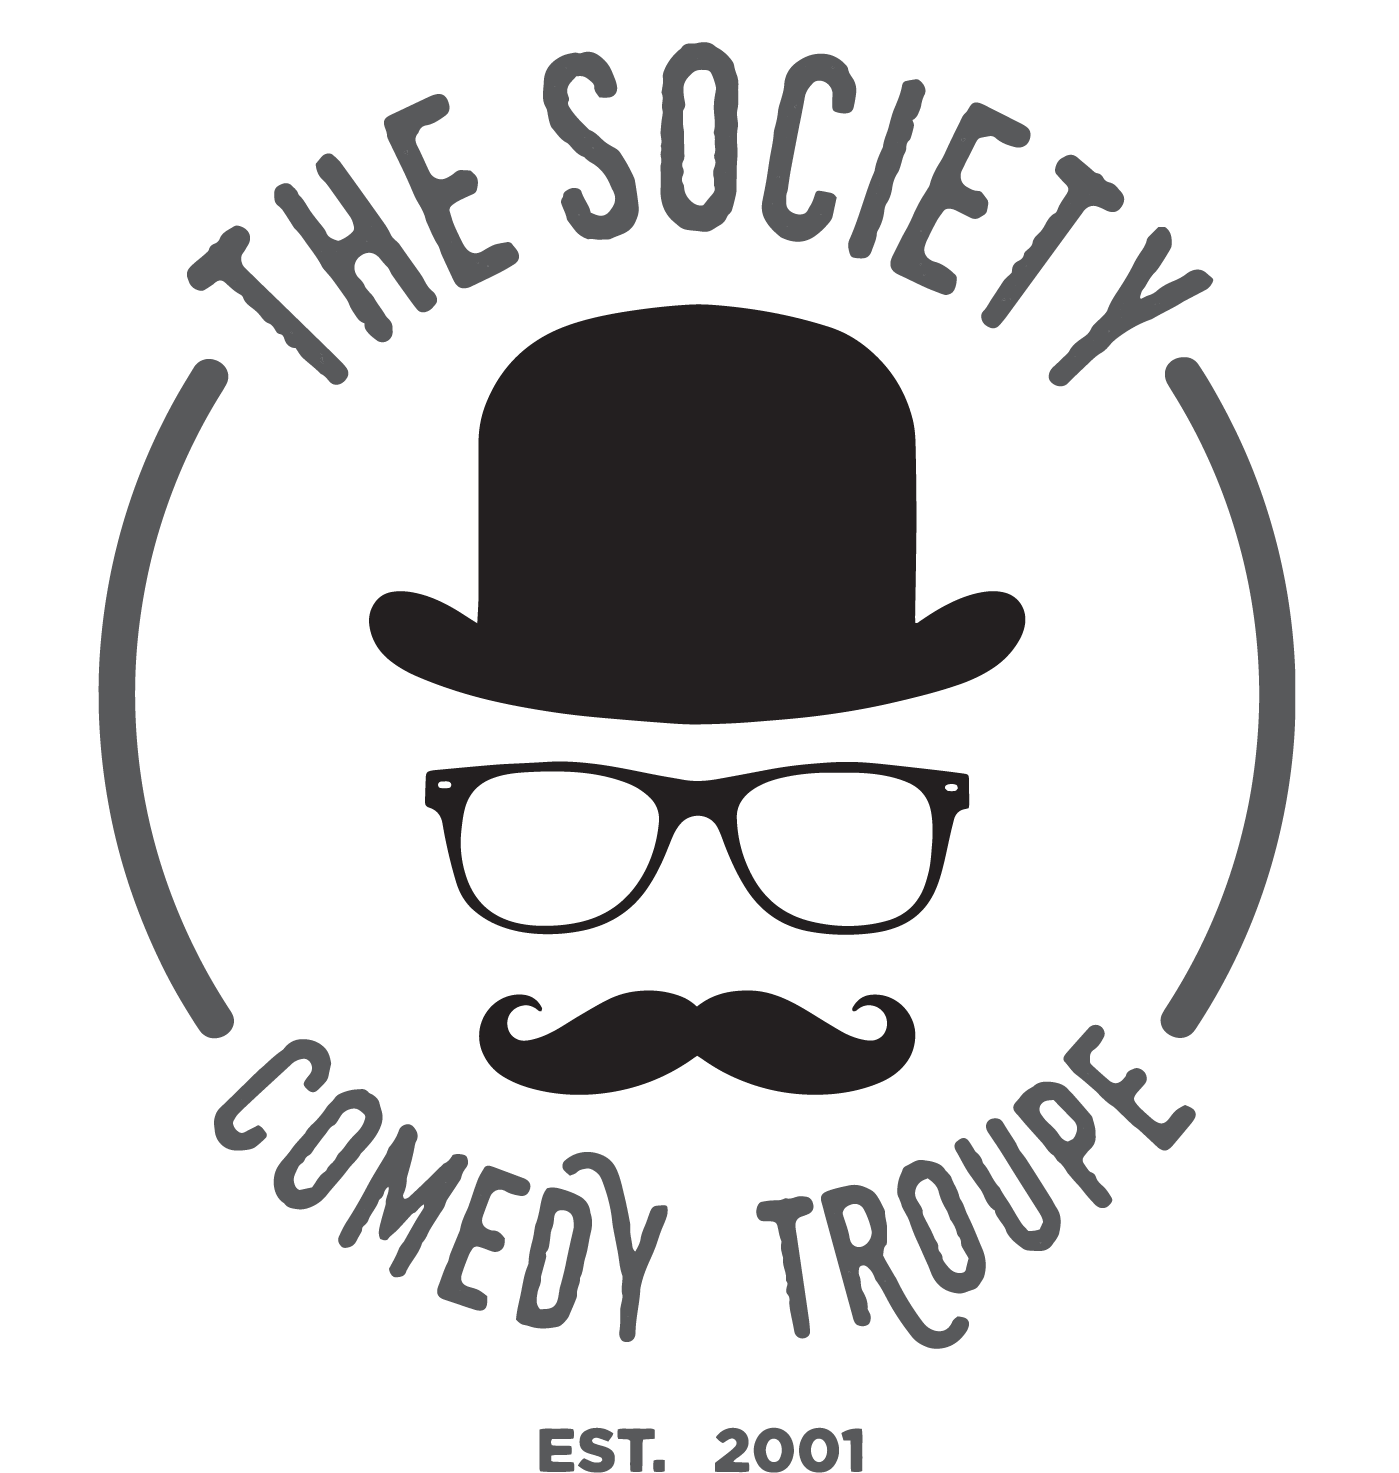 The Society Comedy Troupe